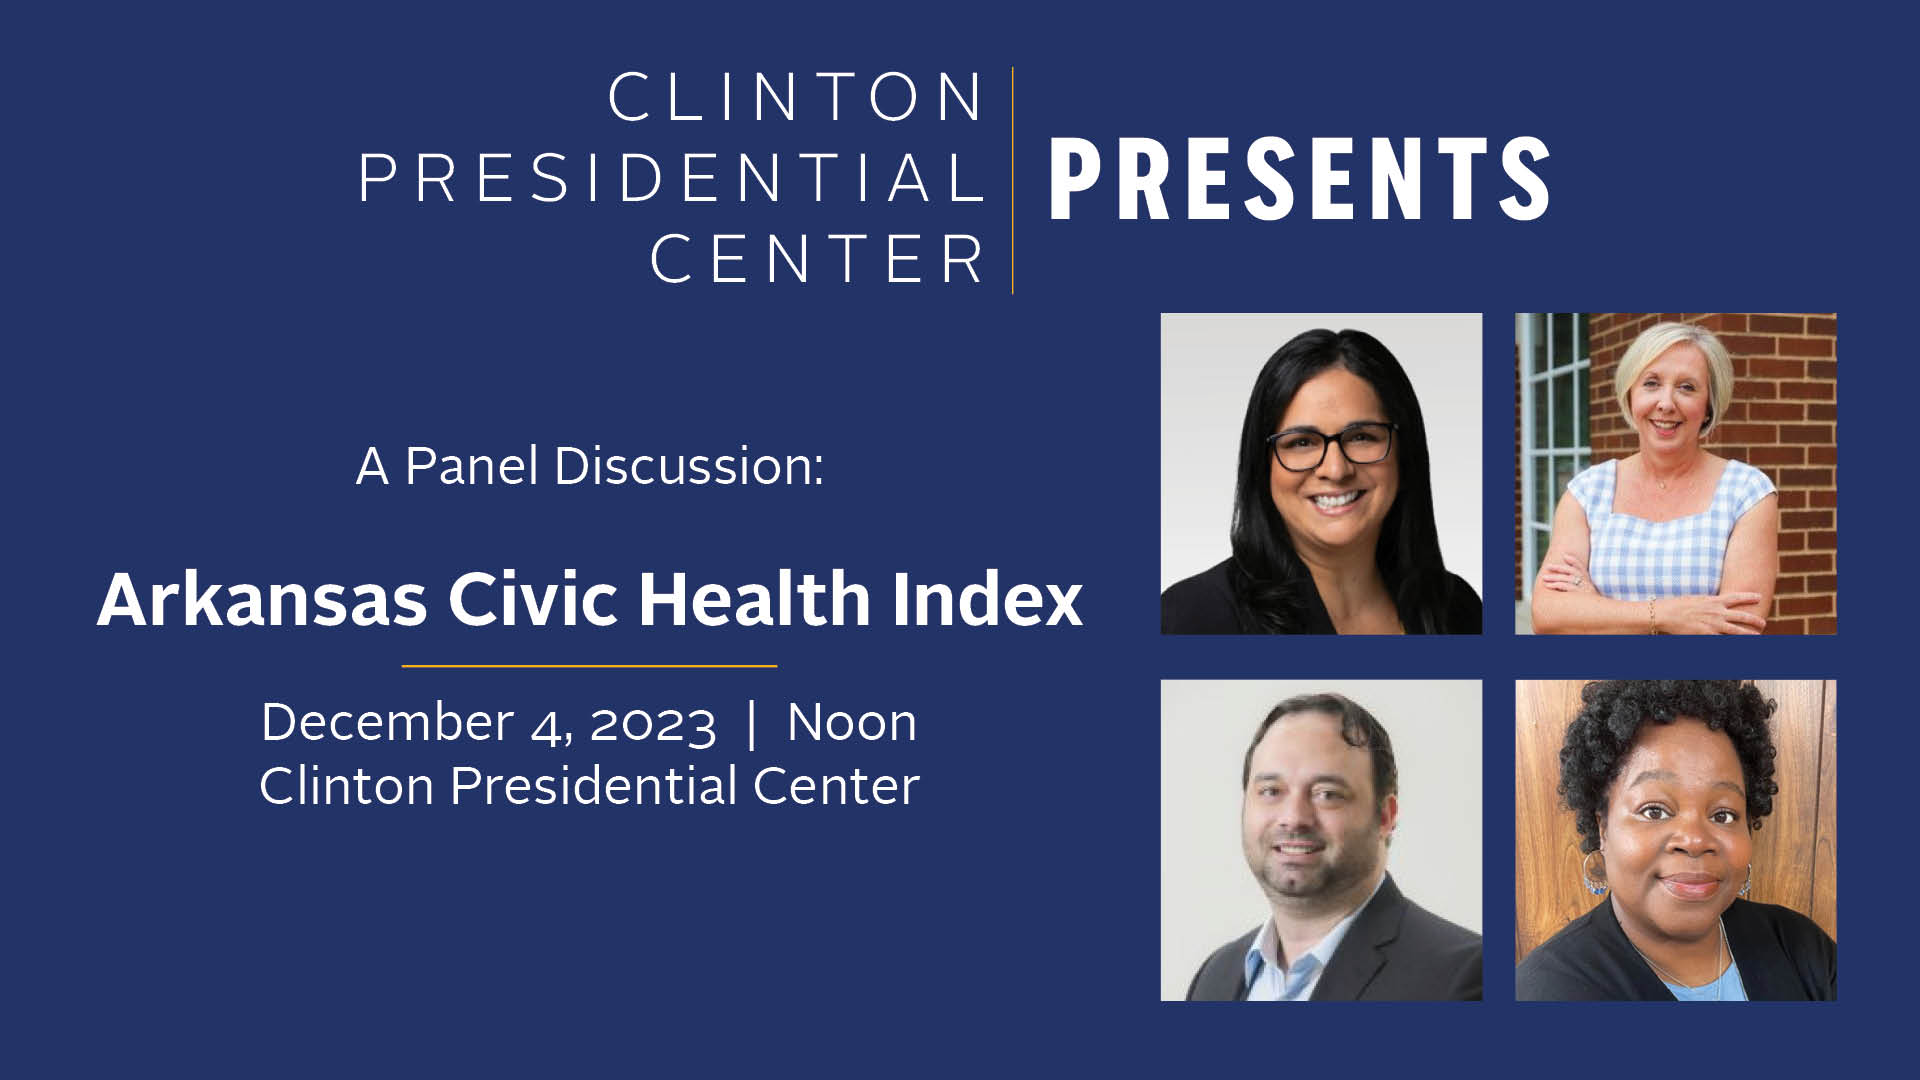 Clinton Presidential Center Presents: A Panel Discussion, Arkansas Civic Health Index